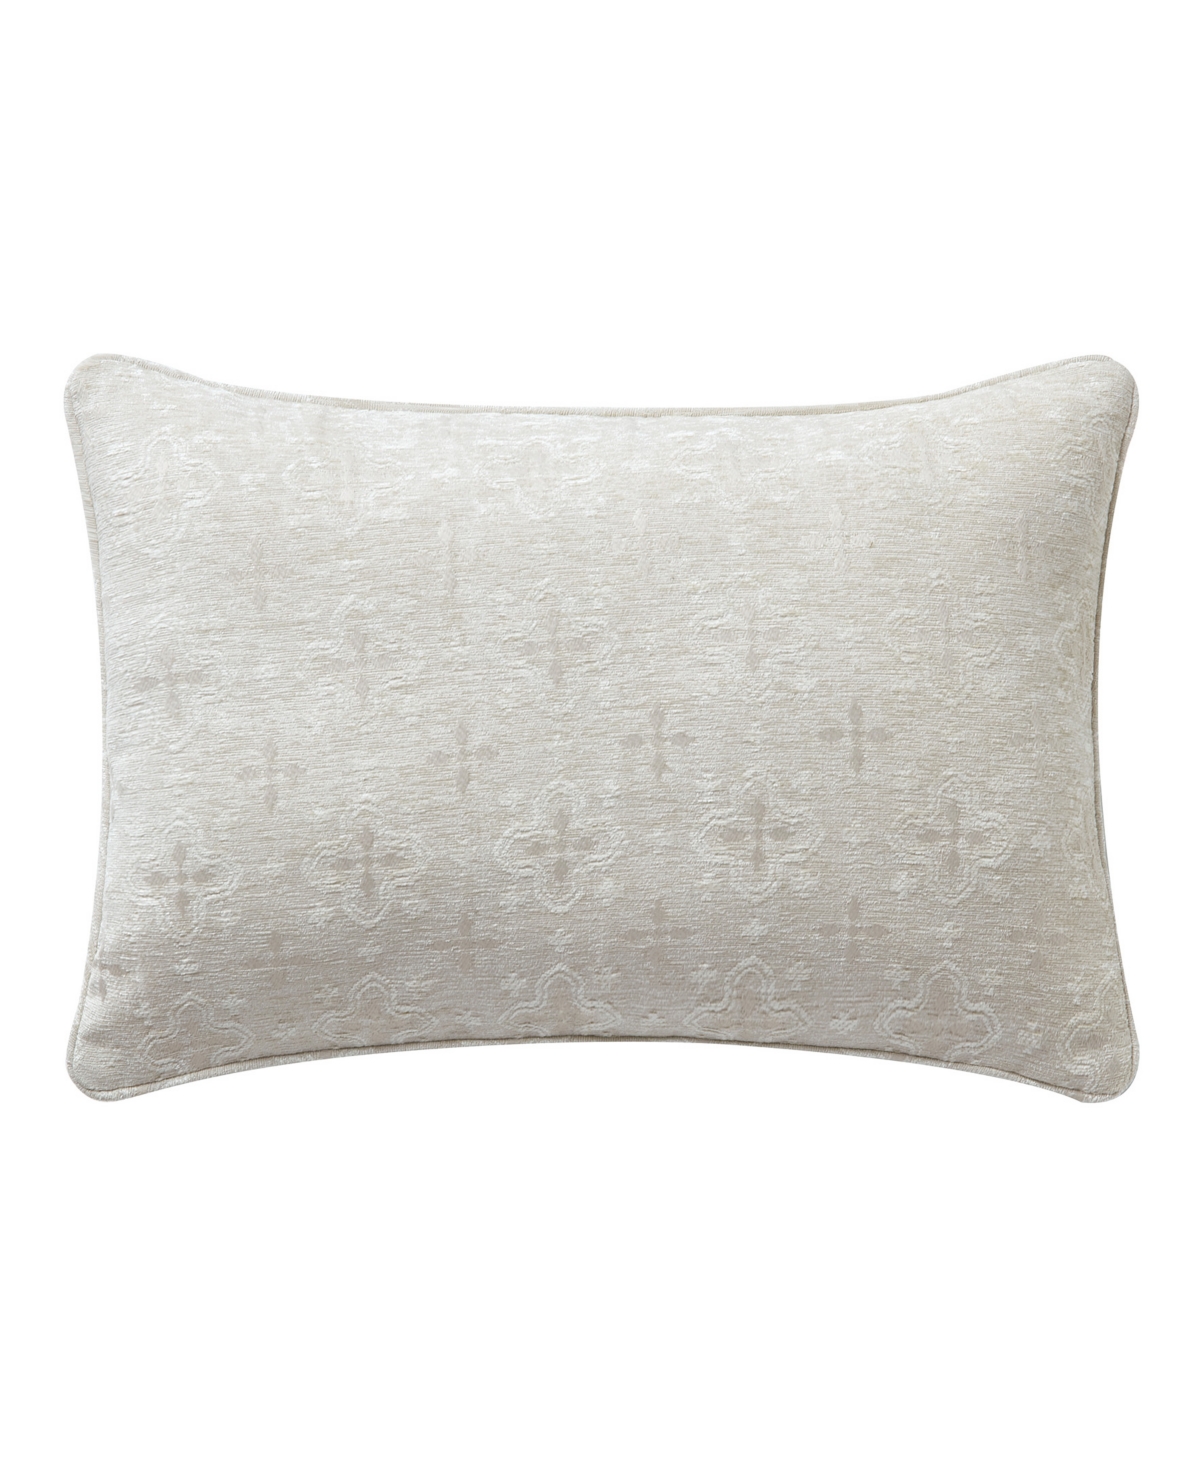 Waterford Sutherland Decorative Pillow, 14 L X 20 W Bedding